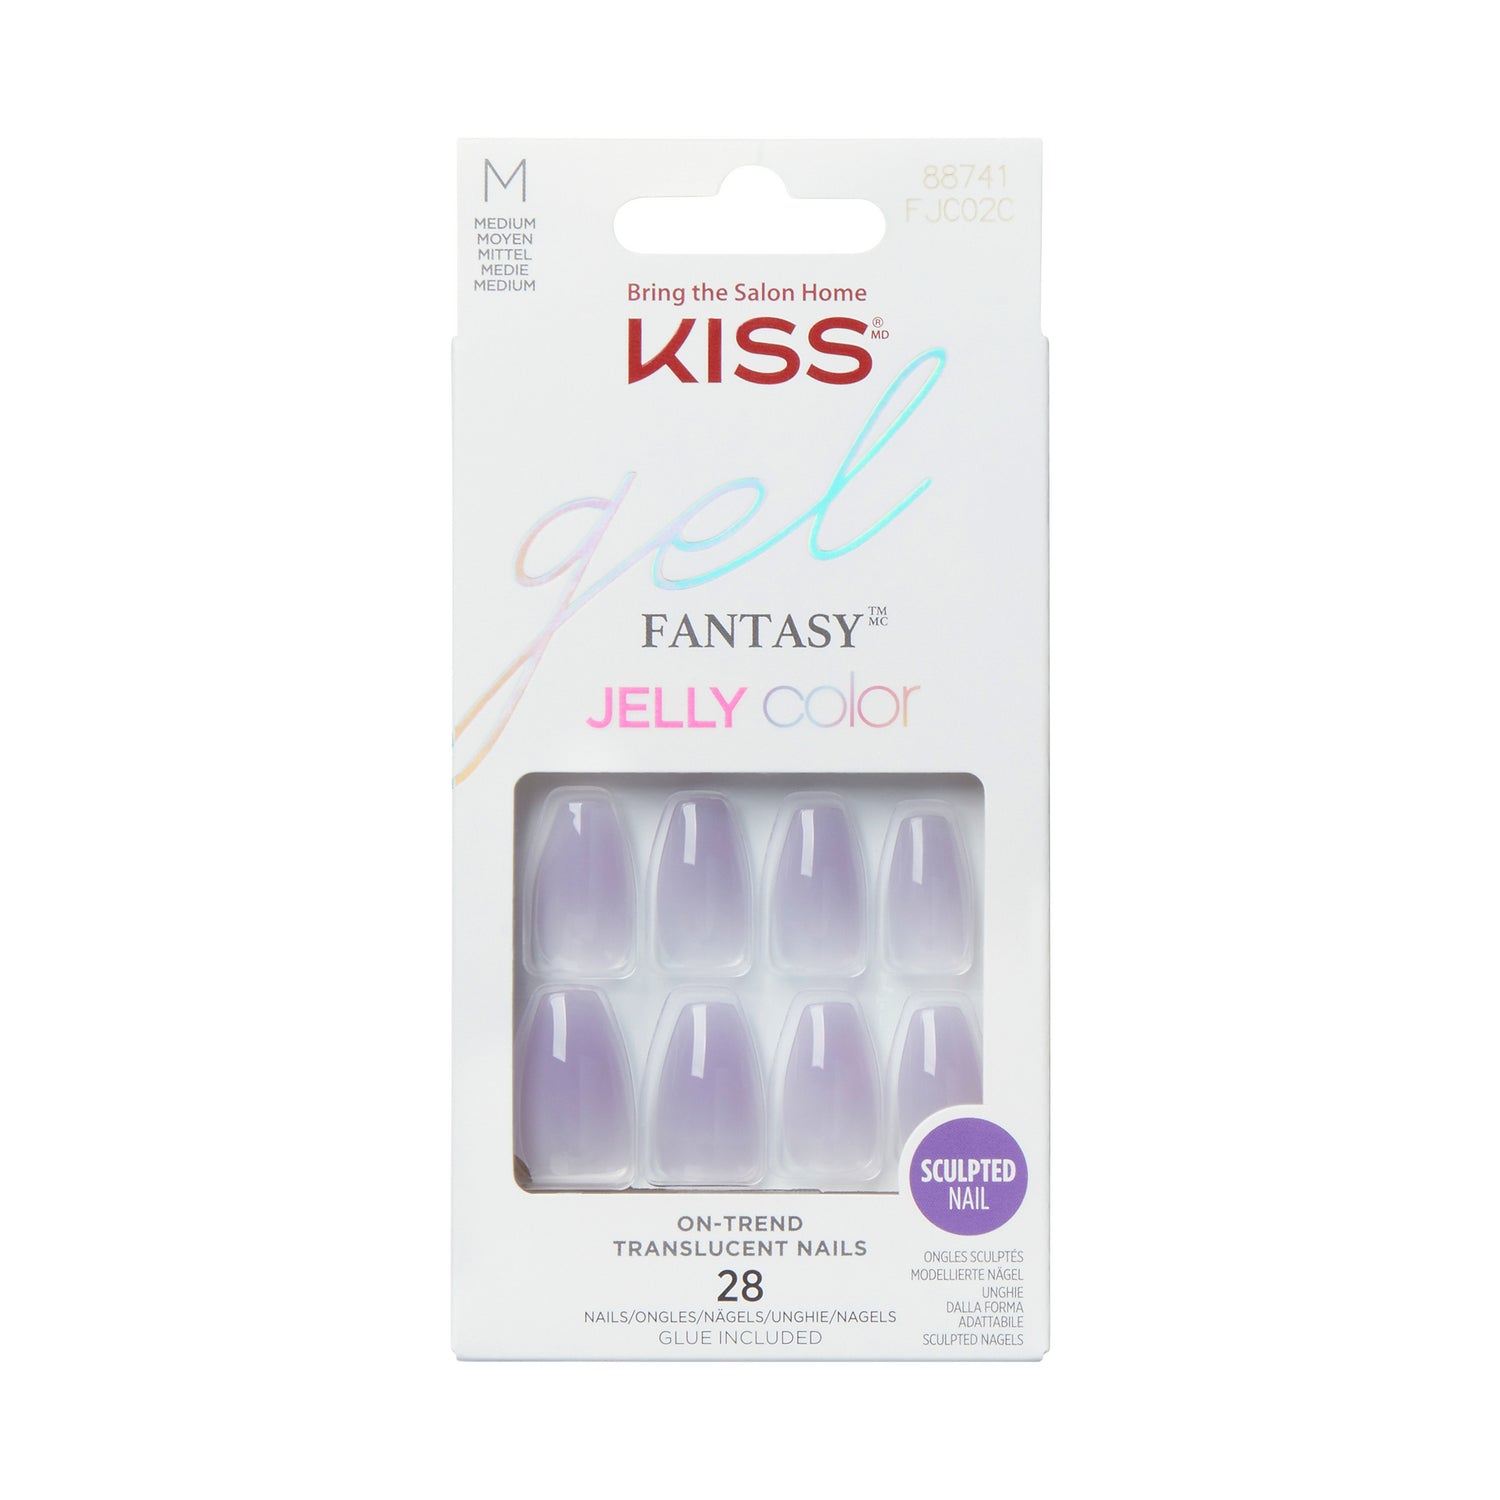 KISS JELLY FANTASY NAILS JELLY QUINCE JELLY Packshot